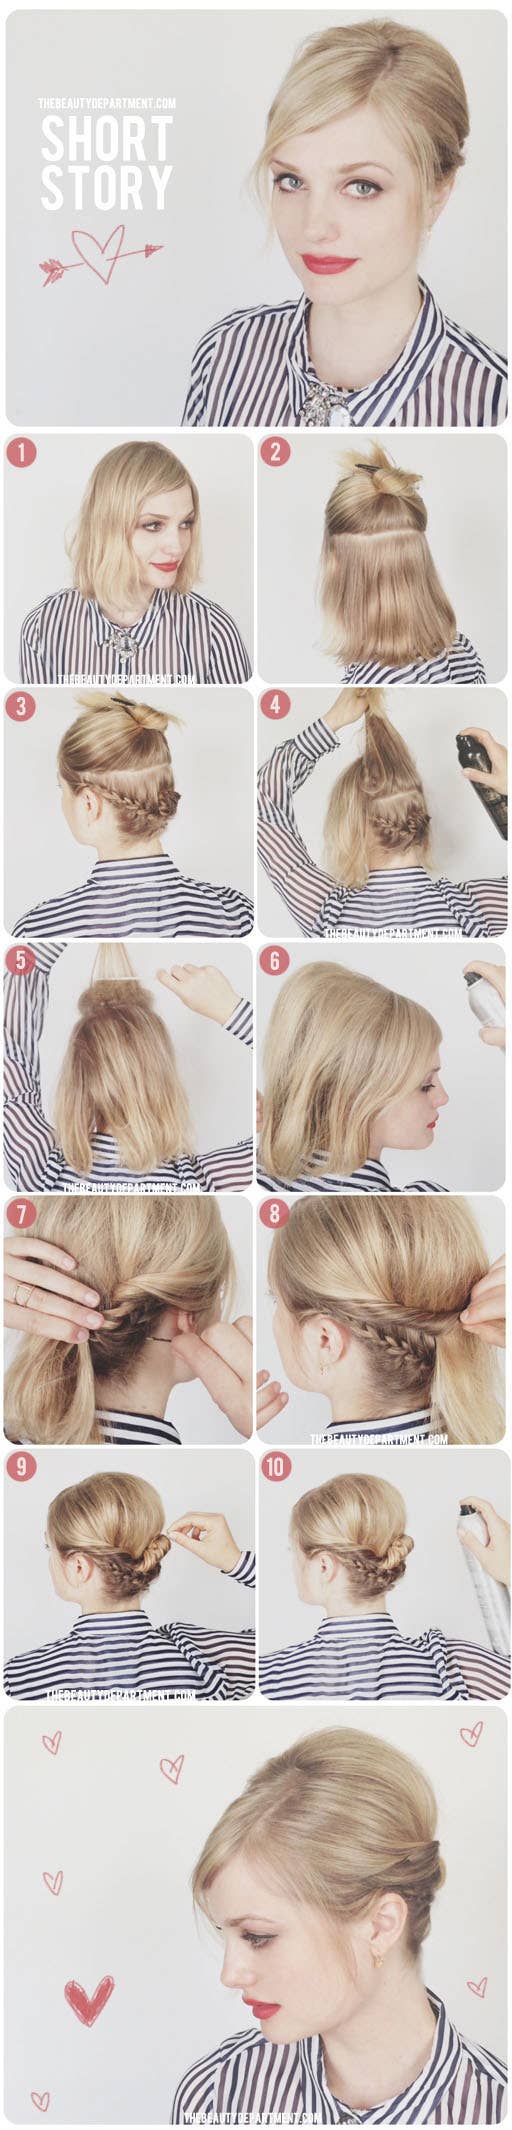 20 Ways To Take Your Short Hair To The Next Level